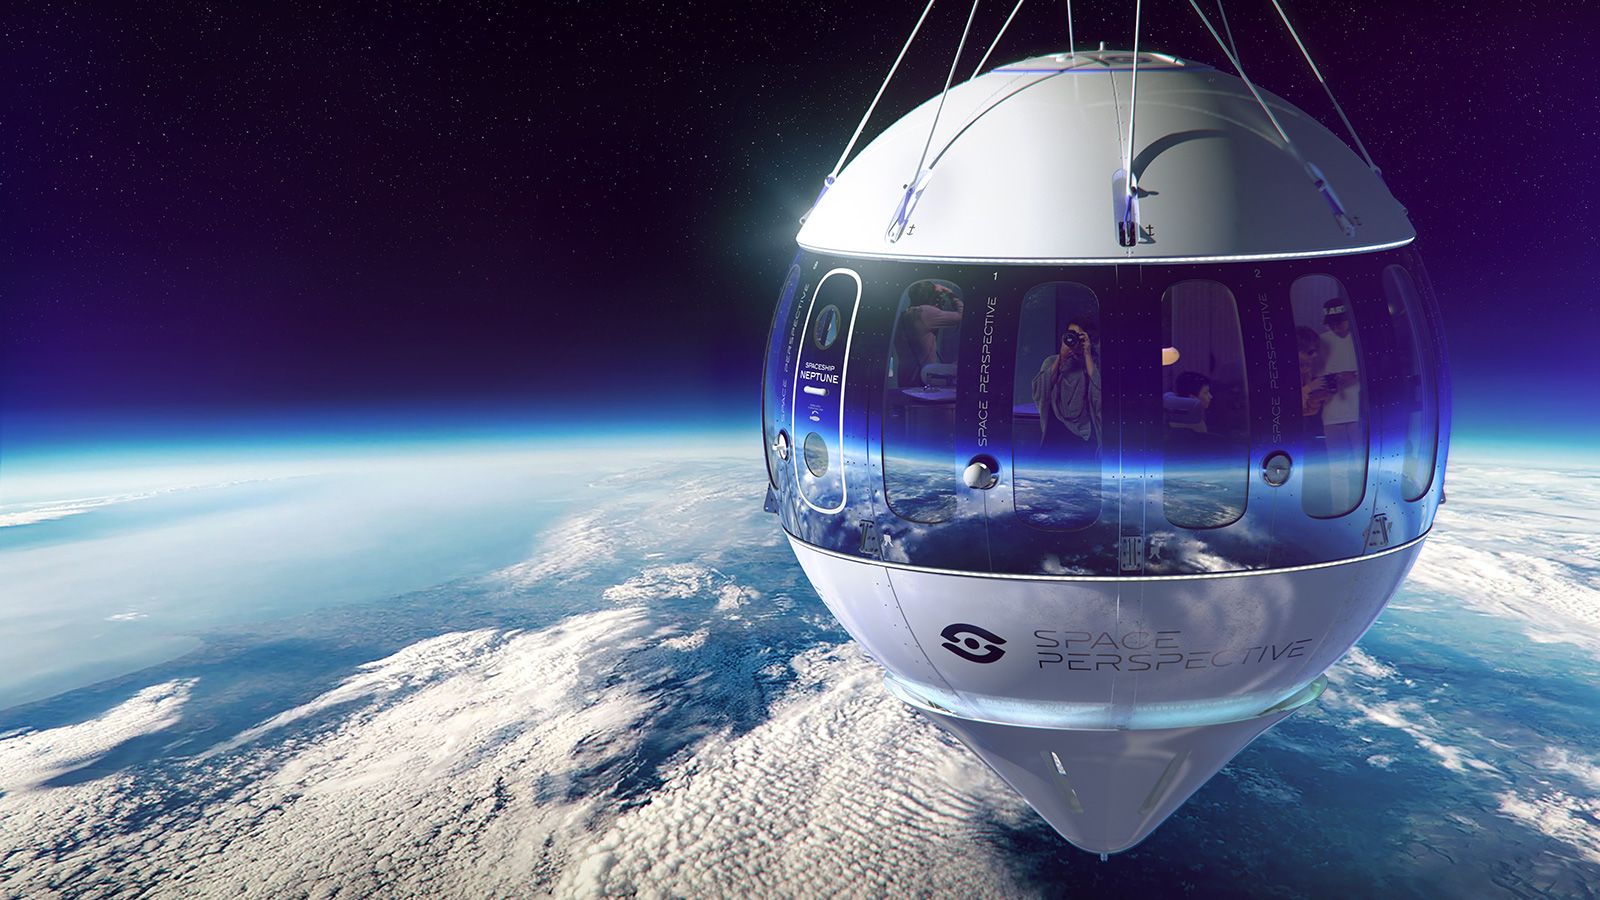 Space Perspective's Spaceship Neptune balloon is currently under development. The company hopes to ...